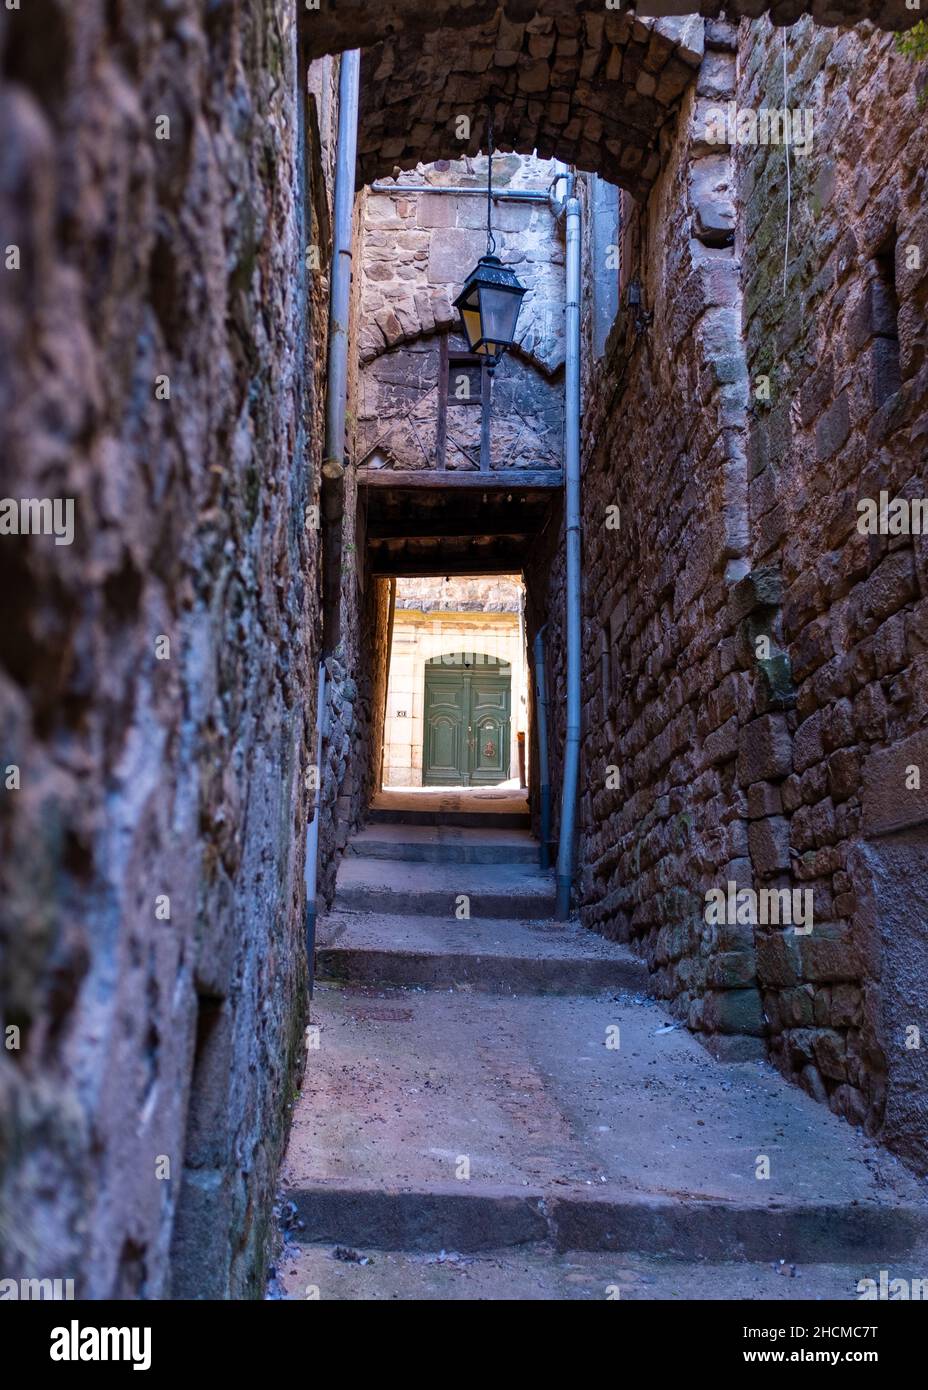 A passageway in the town of Joyeuse located in Southern France, taken on a sunny summer morning with no people Stock Photo